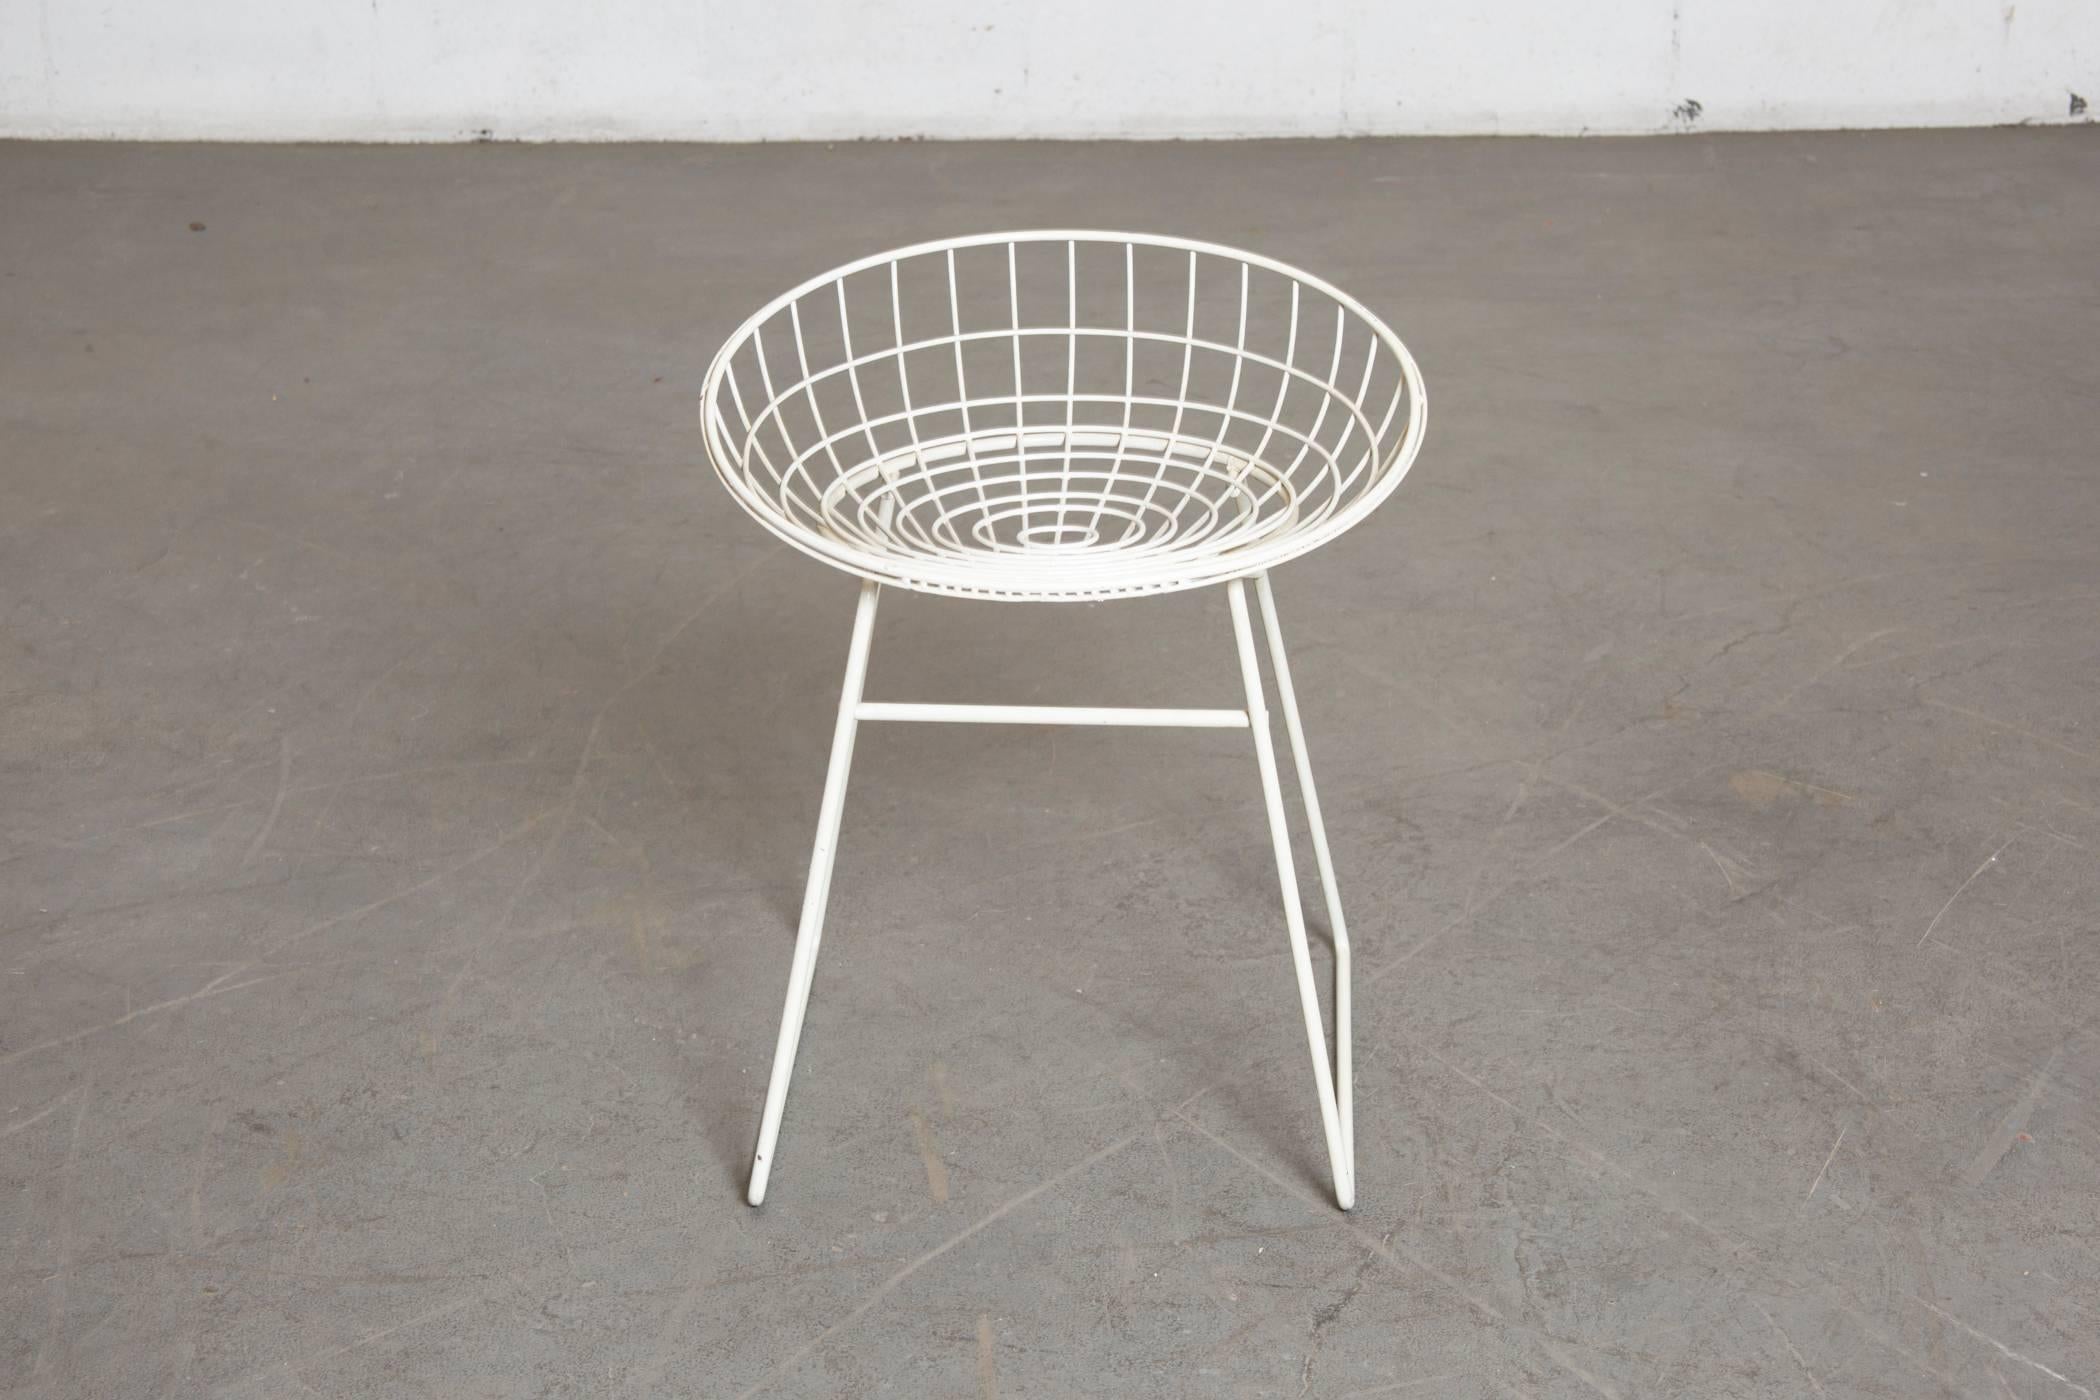 White enameled wire vanity stool or outdoor chair by Braakman and Dekker. Original condition with visible signs of wear to Enamel and some surface rust.